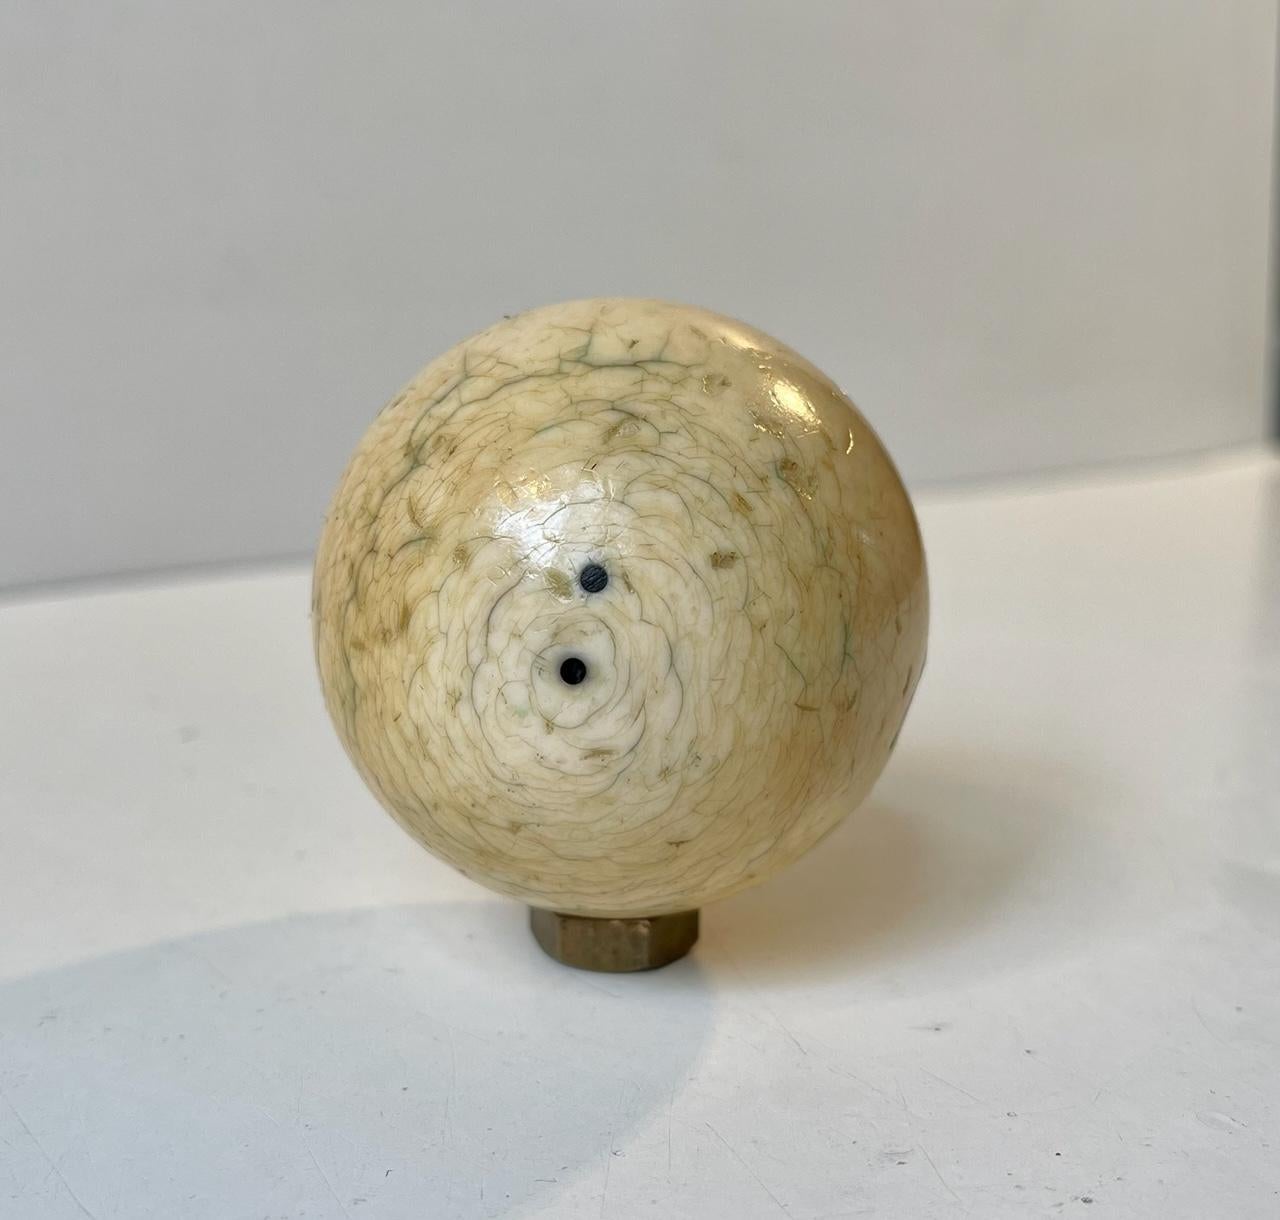 Now serving as a decorative tooth sphere this was originally an object designed for Billiards which was invented in France prior to 1730. This particular cue ball dates to circa 1900. Cites regulations does not apply to objects obviously made prior